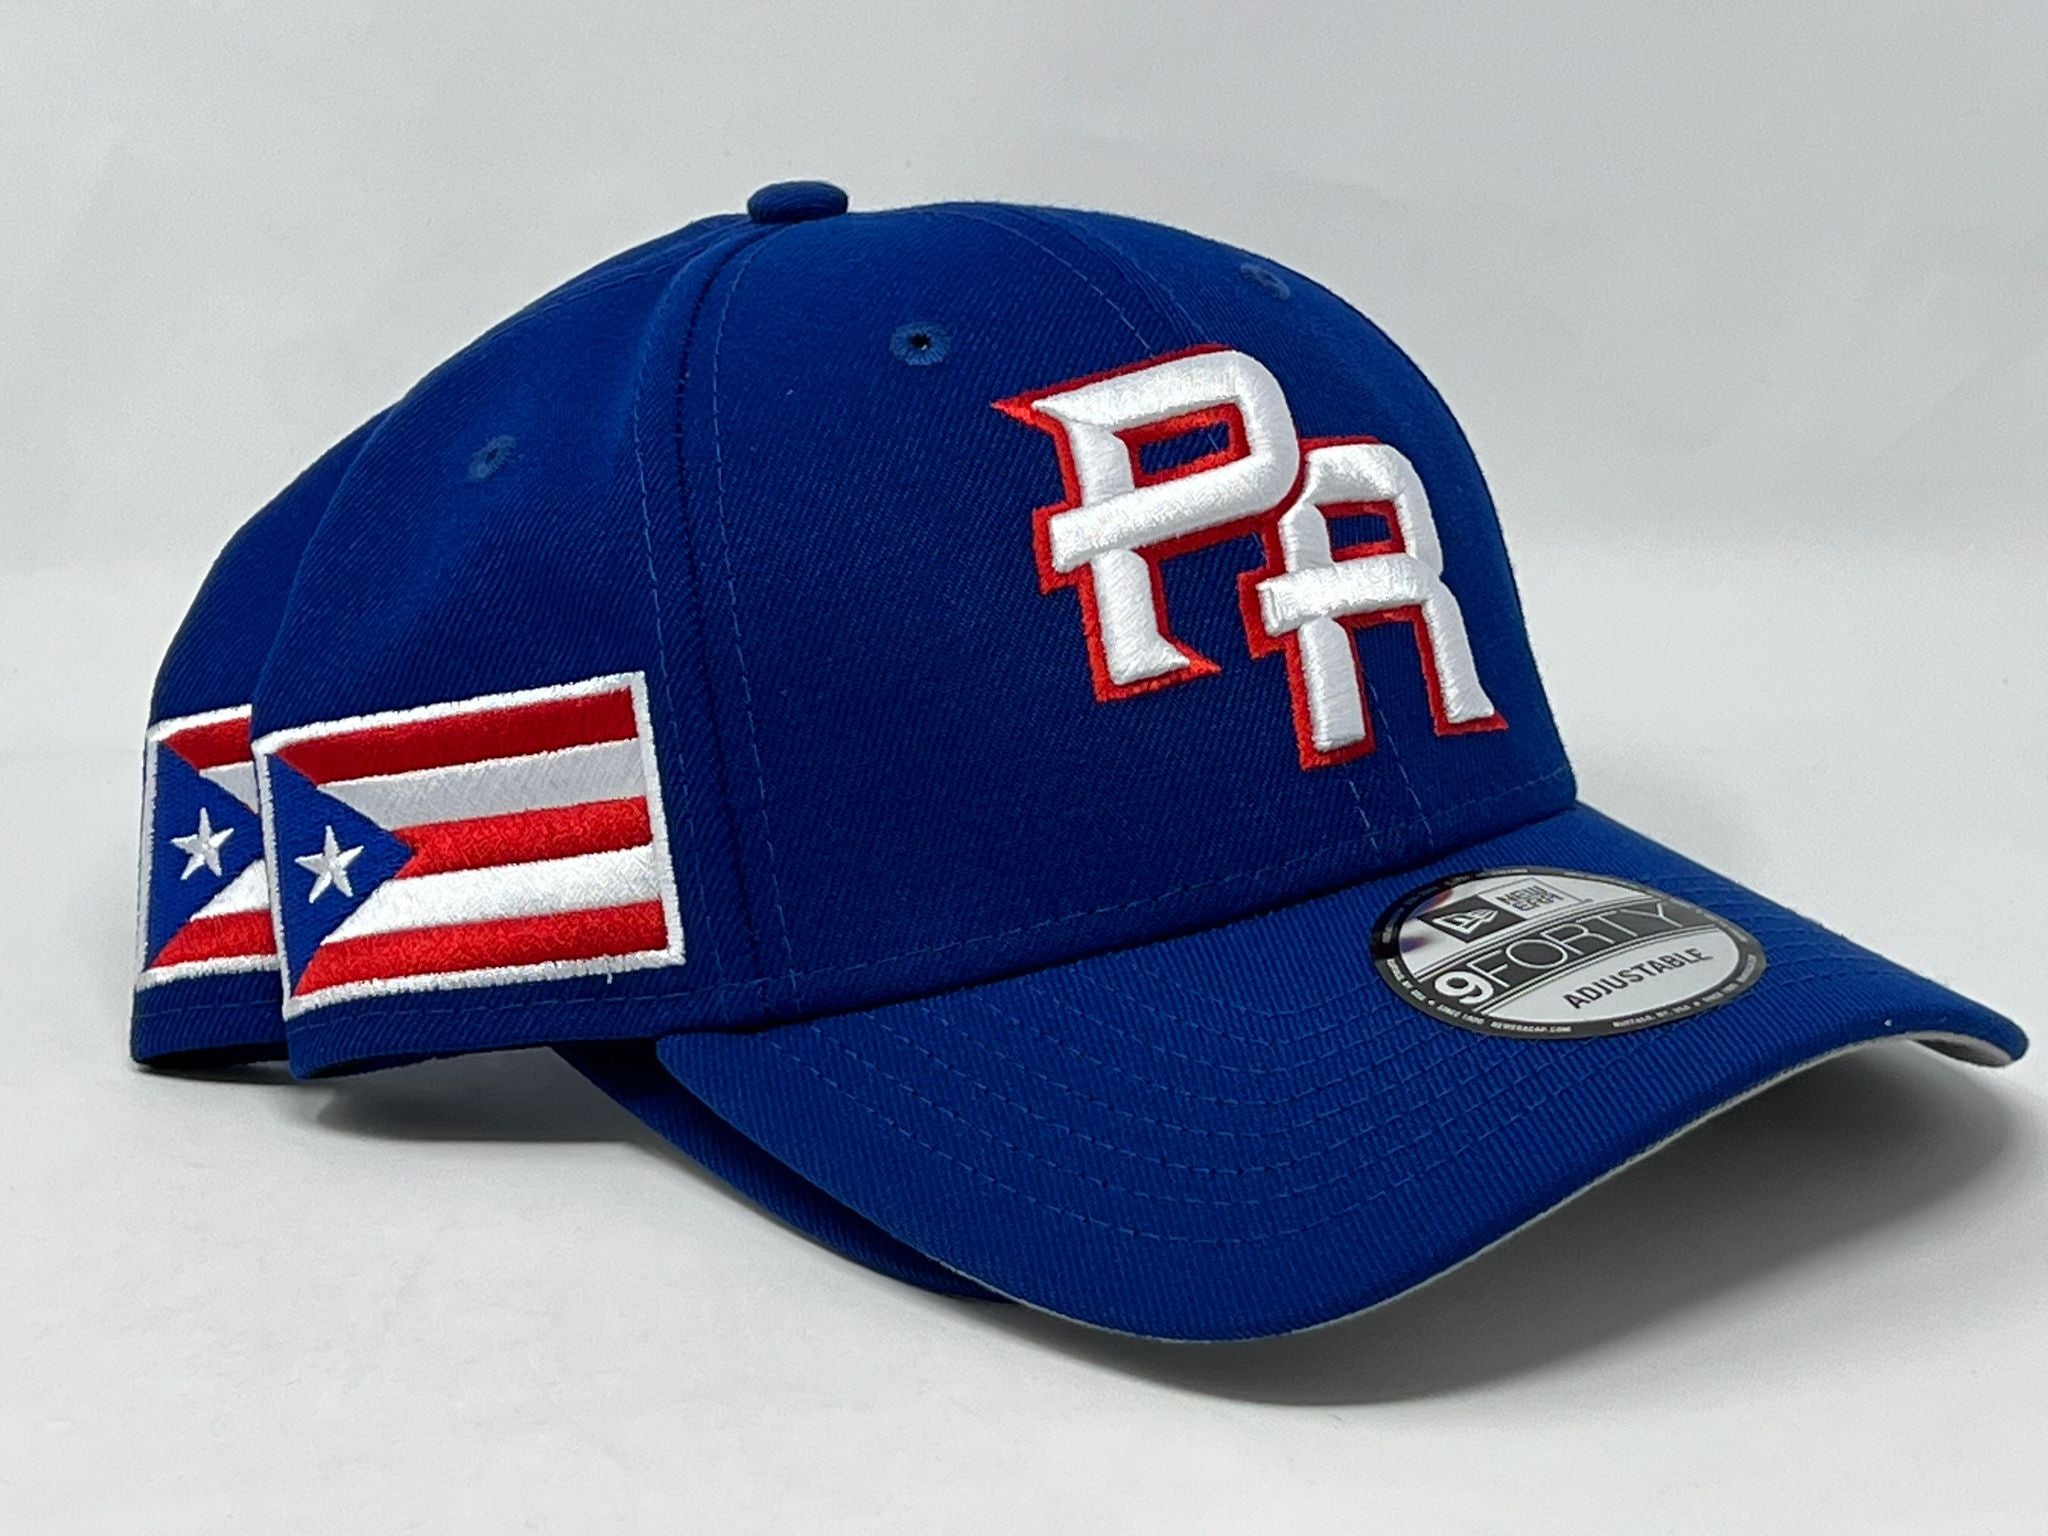 2023 WBC Puerto Rico World Baseball Classic Fitted Hat New Era 59FIFTY  Official